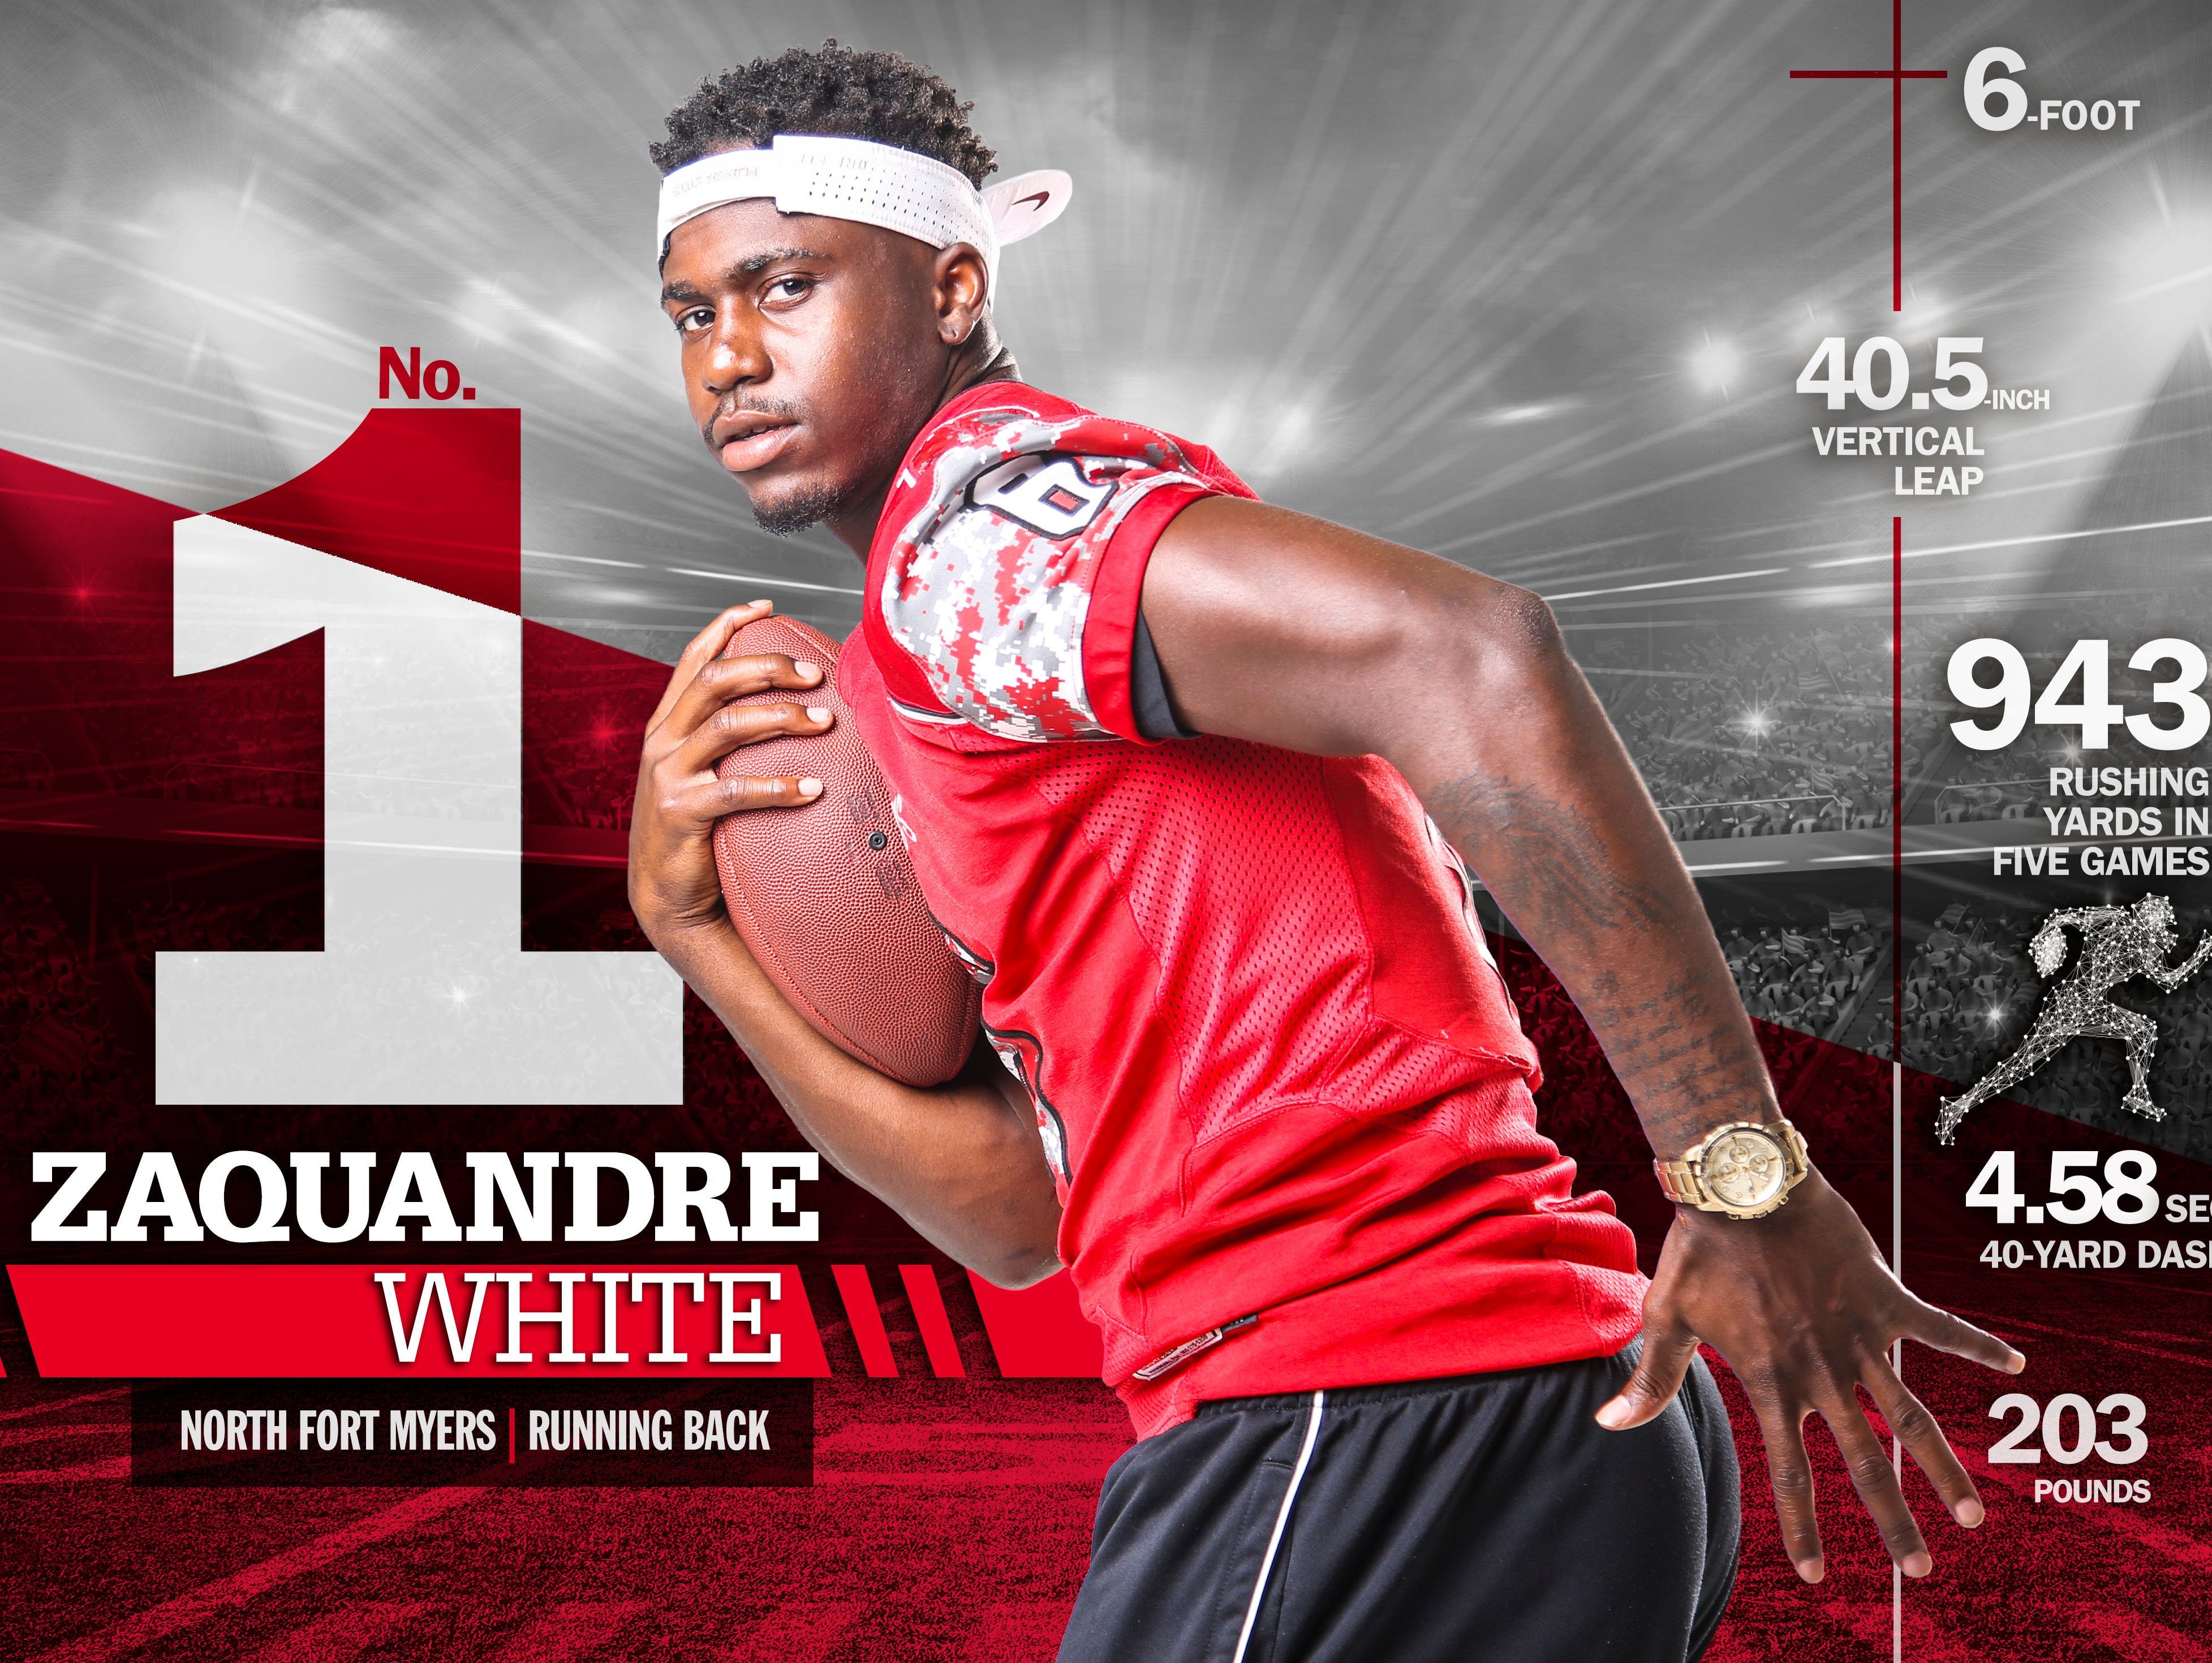 Zaquandre White, South Fort Myers